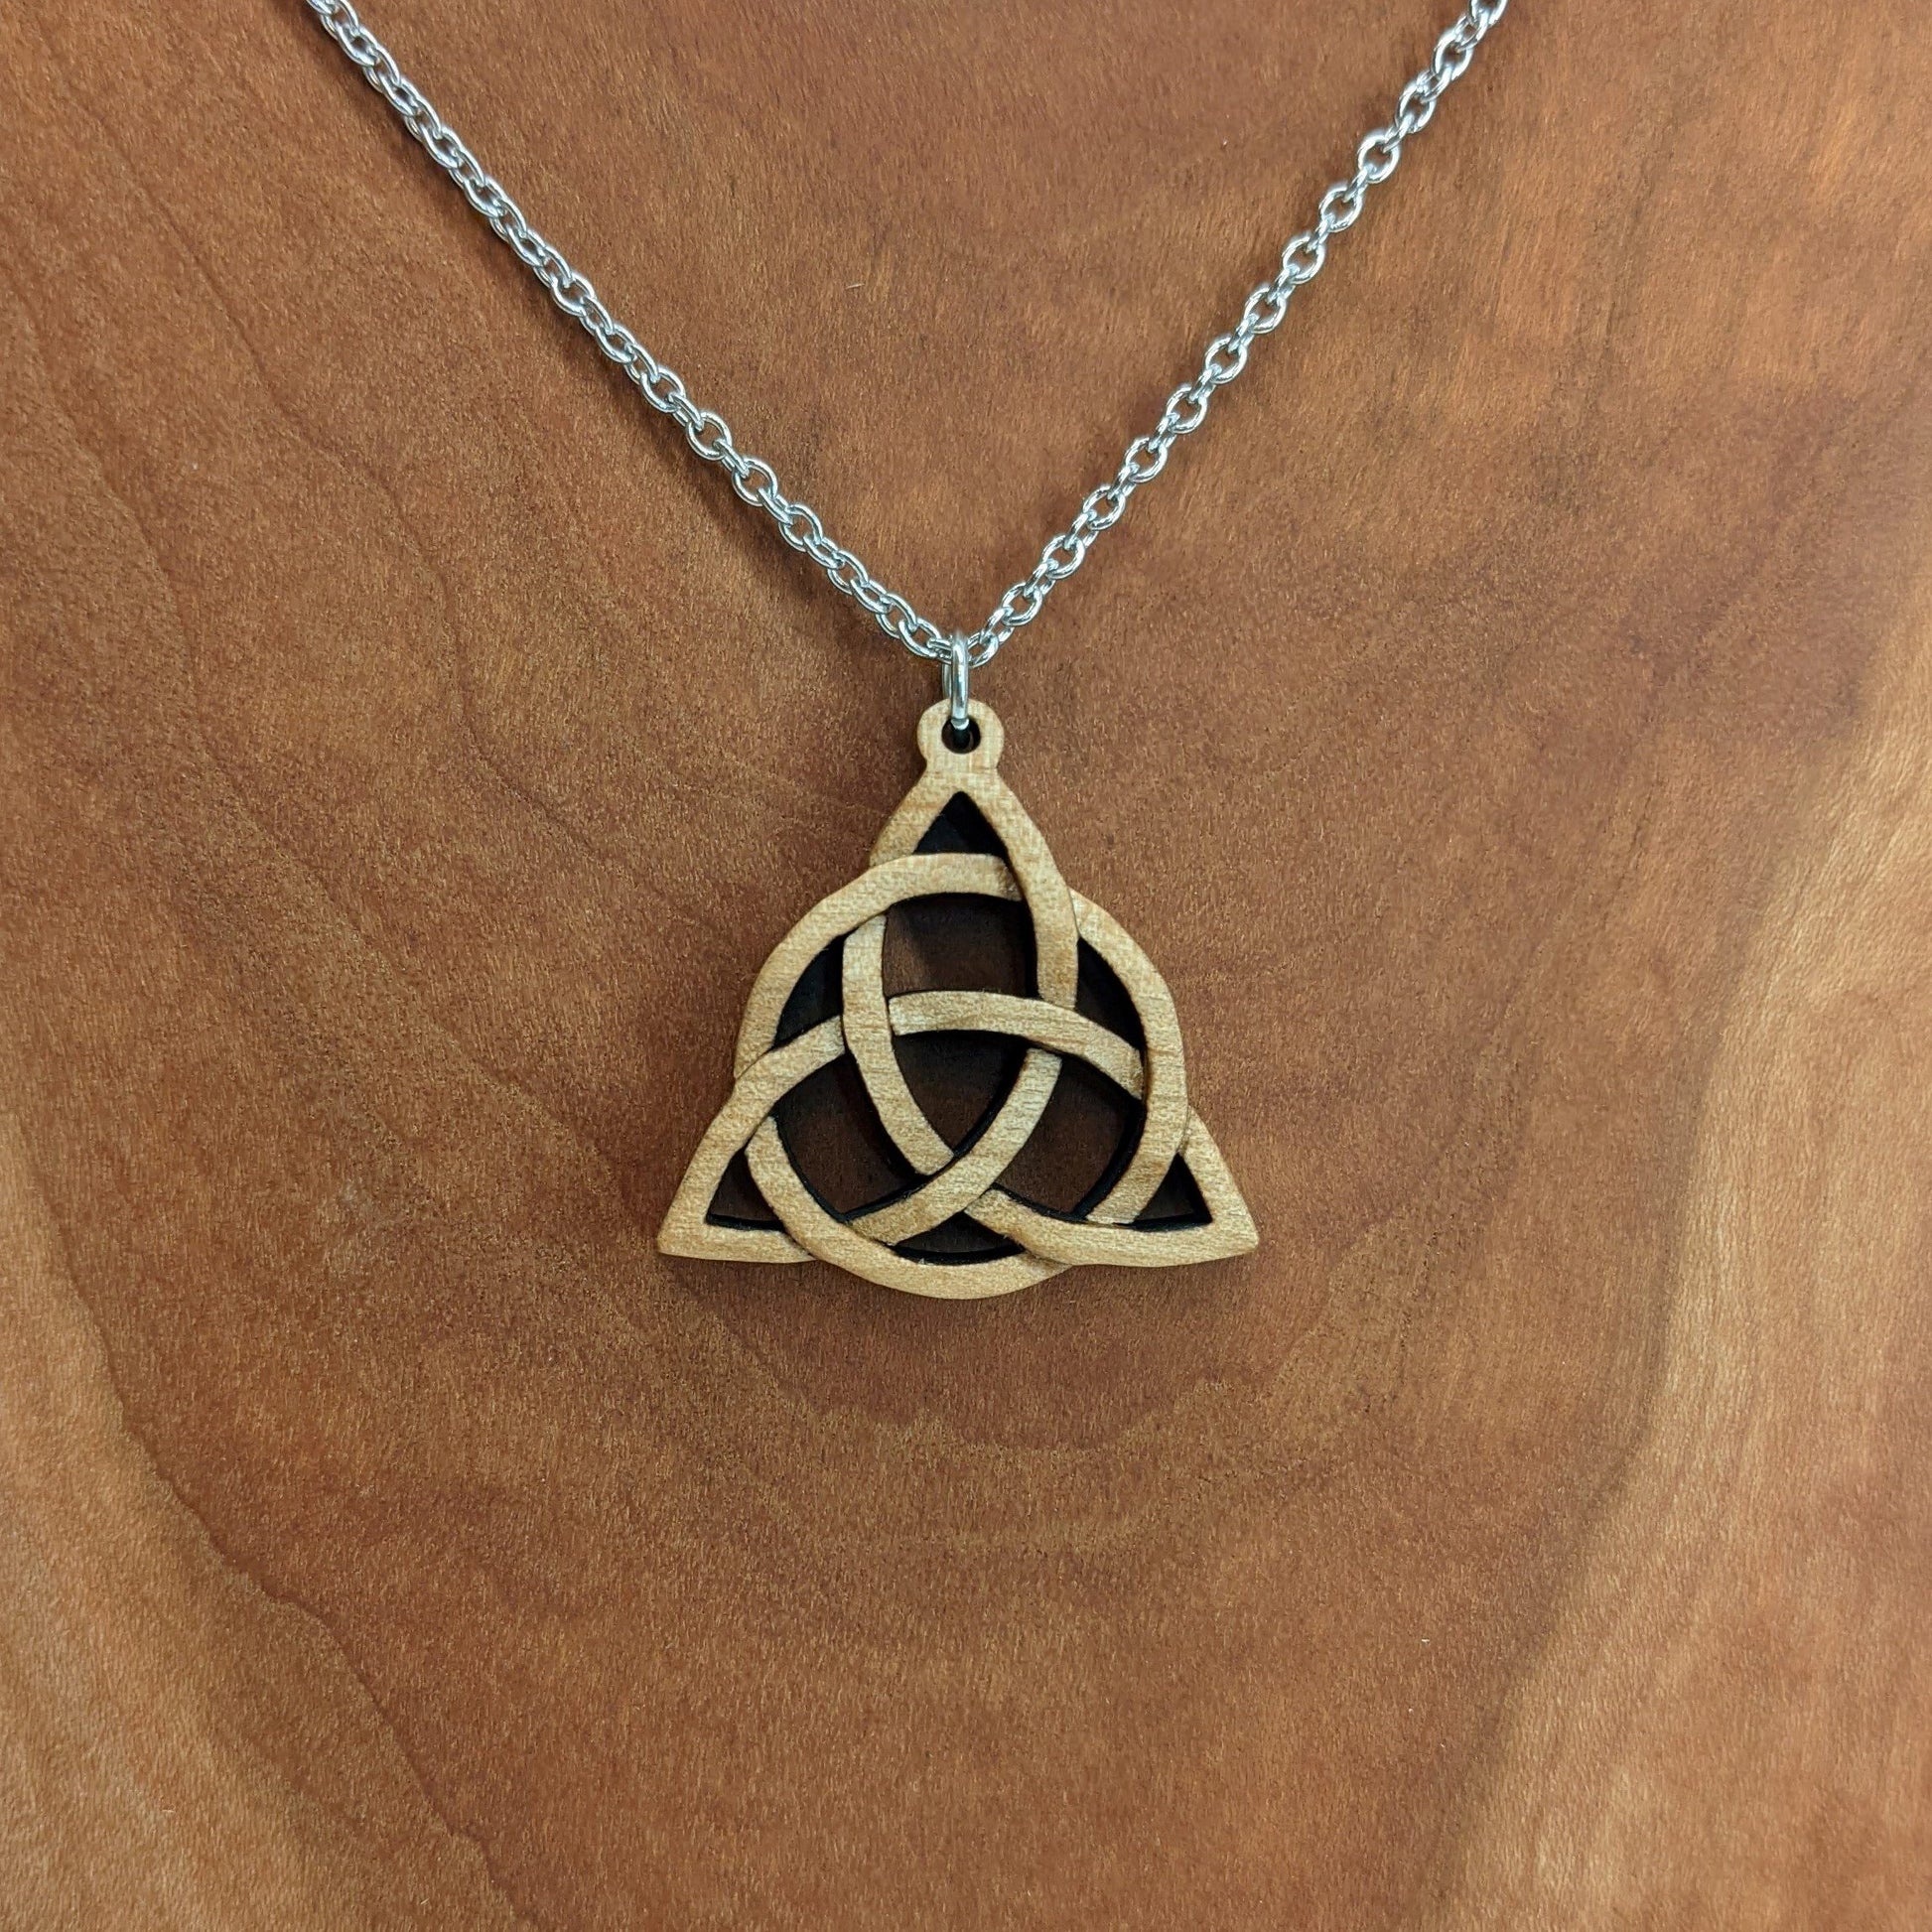 Wooden necklace pendant created in the style of a Celtic woven trinity symbol. Made from hard maple.  Hanging from a silver stainless steel chain against a cherry wood background.